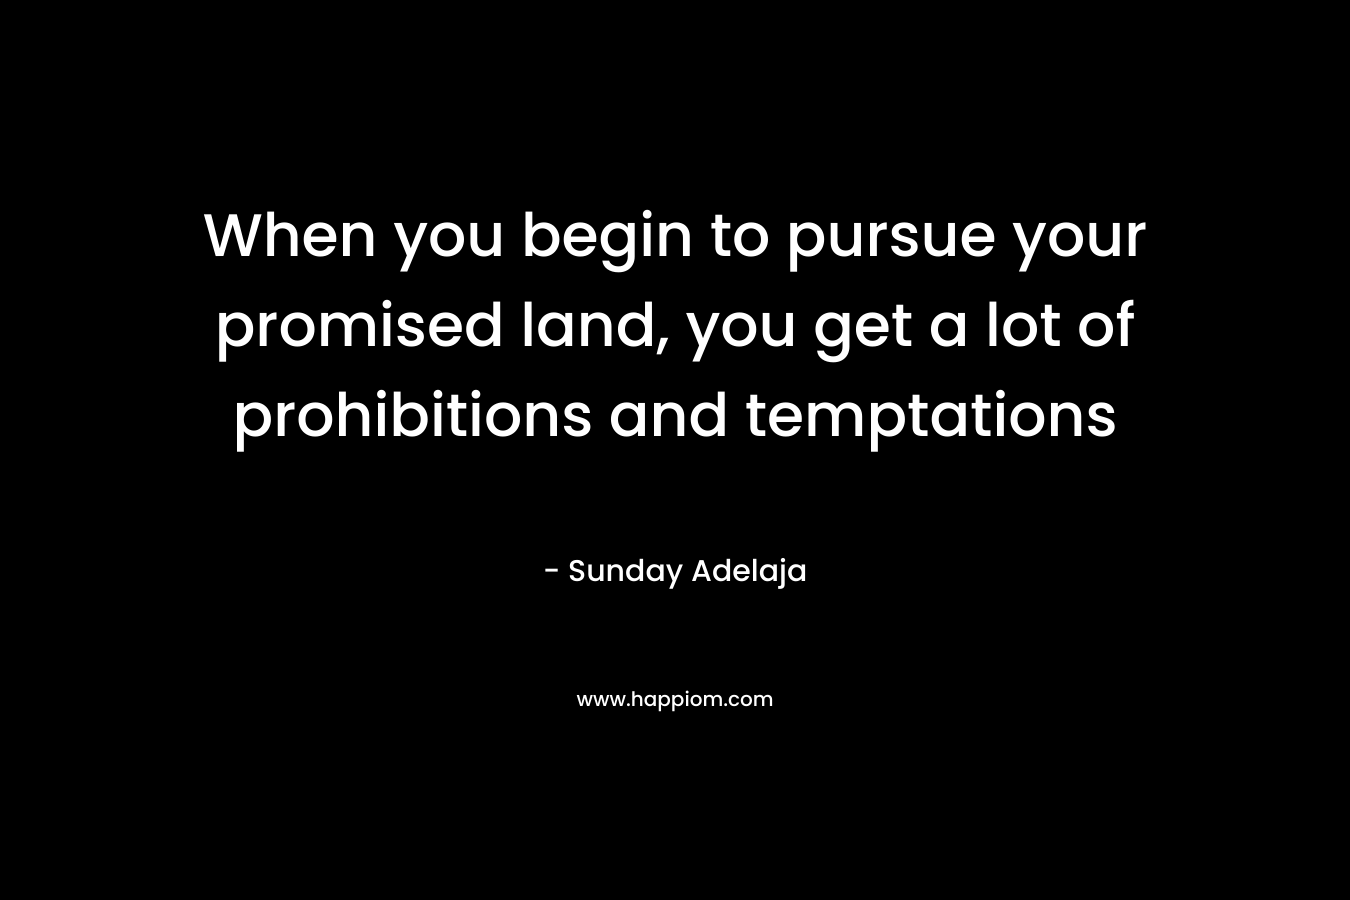 When you begin to pursue your promised land, you get a lot of prohibitions and temptations – Sunday Adelaja